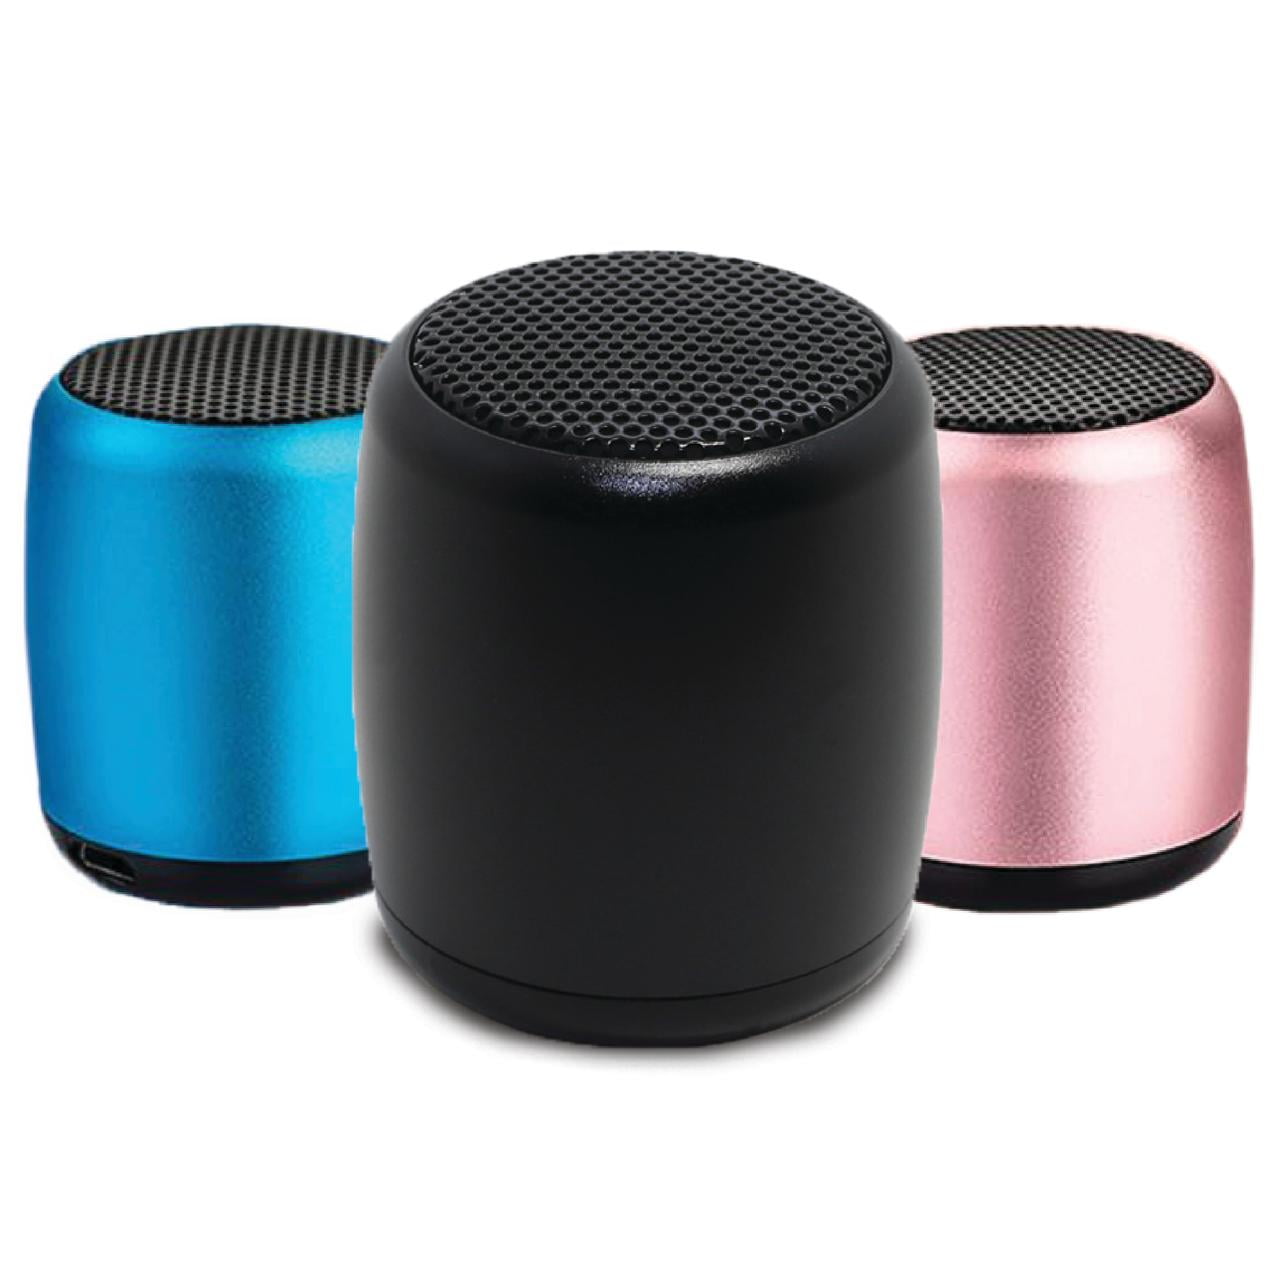 Ematic Portable Bluetooth Speaker and Speakerphone, Enjoy High Quality